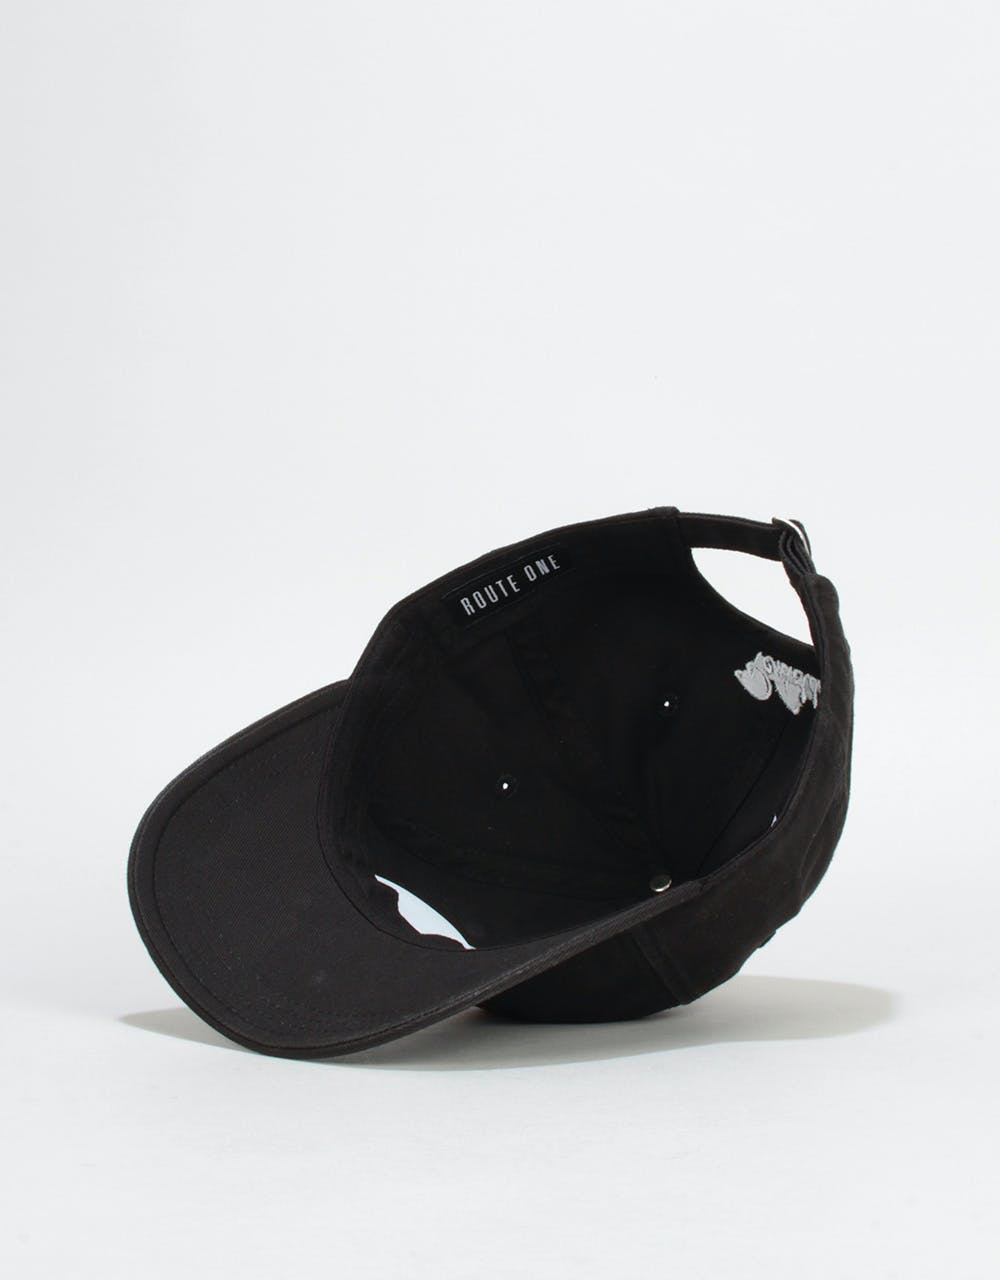 Route One x Mr. Penfold Dog Ends Dad Cap - Black